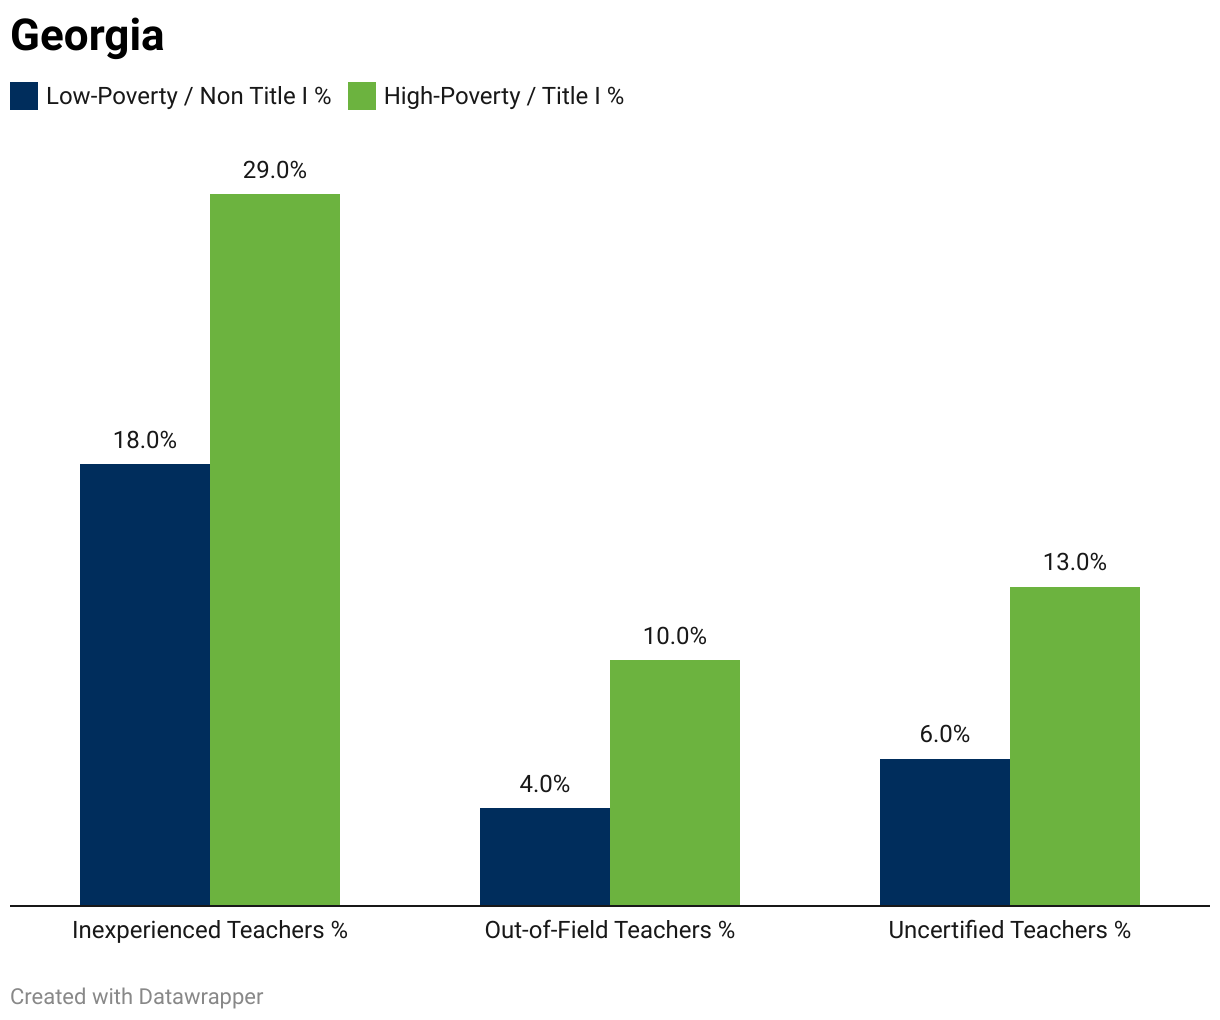 A grouped column chart showing the percentage of inexperienced, out-of-field and uncertified teachers in low-poverty non-Title I schools vs. higher-poverty Title I schools IN GEORGIA.